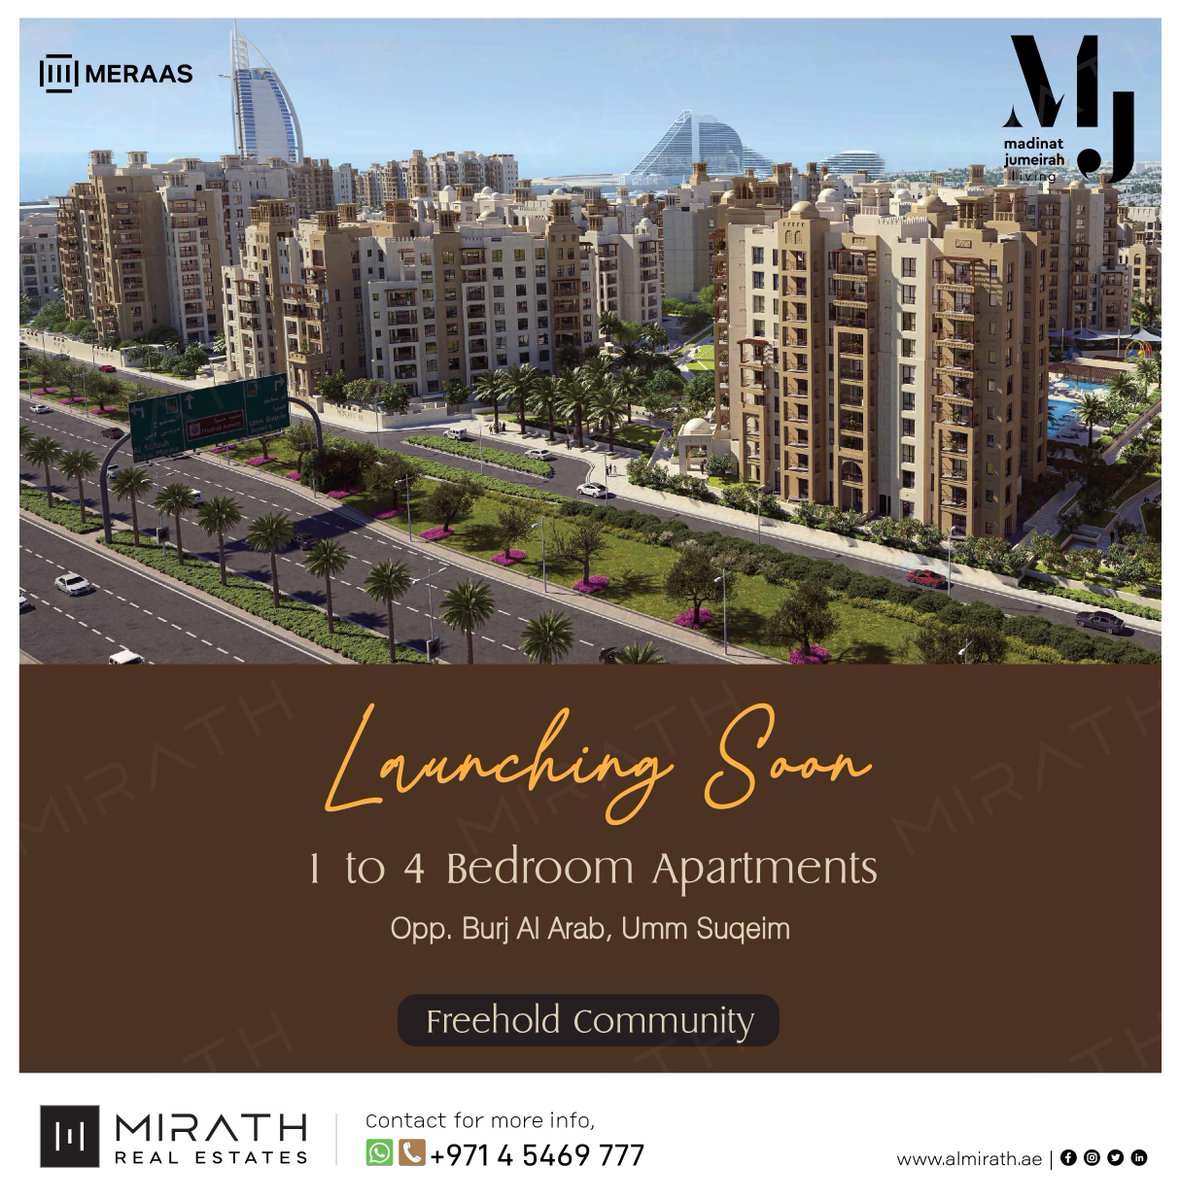 💥Breaking news:
Taking reservations for the new phase of MJL.

Contact us to know more:
☎️+971 4 5469 777
📧 almirathrealestate@gmail.com
🌐almirath.ae

#MJL #MadinatJumeirahLiving #MadinatJumeirahLiving #meraas #DubaiProperties #dxb #dxblife #propertyexpert